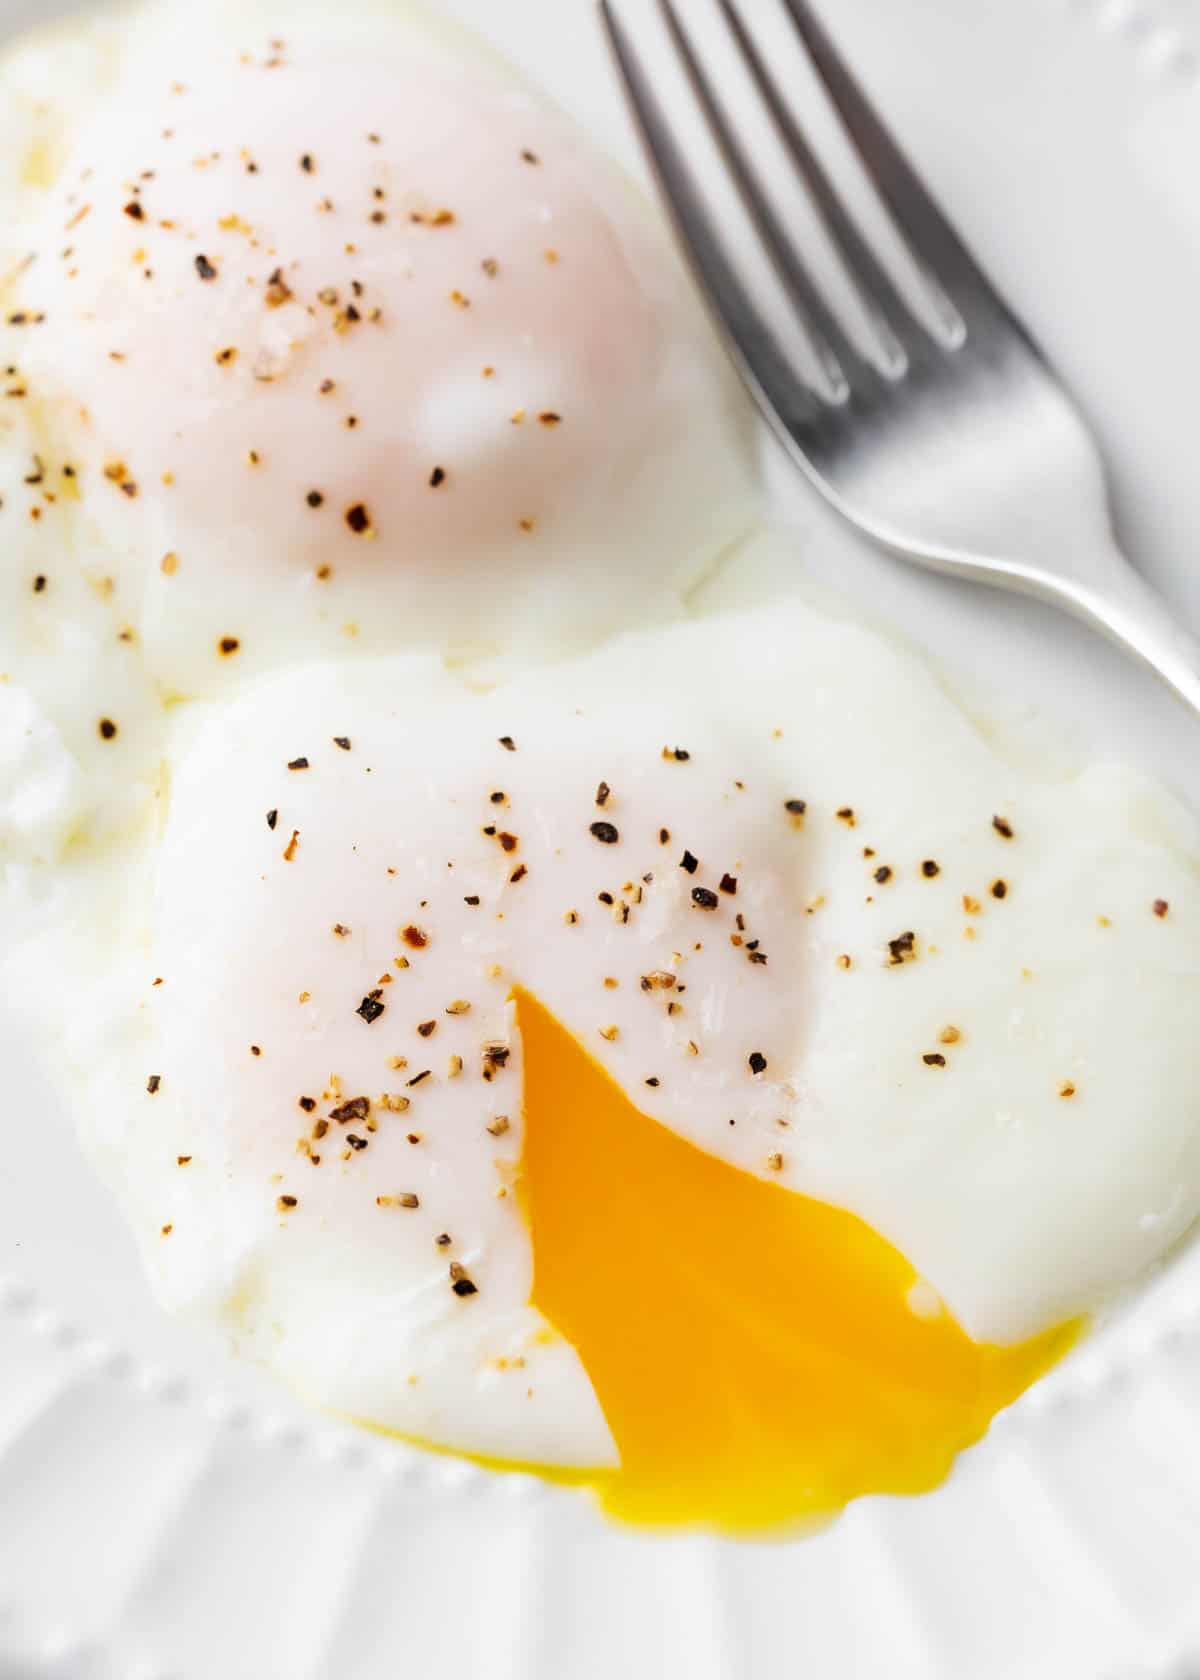 Poached eggs cut open on white plate.